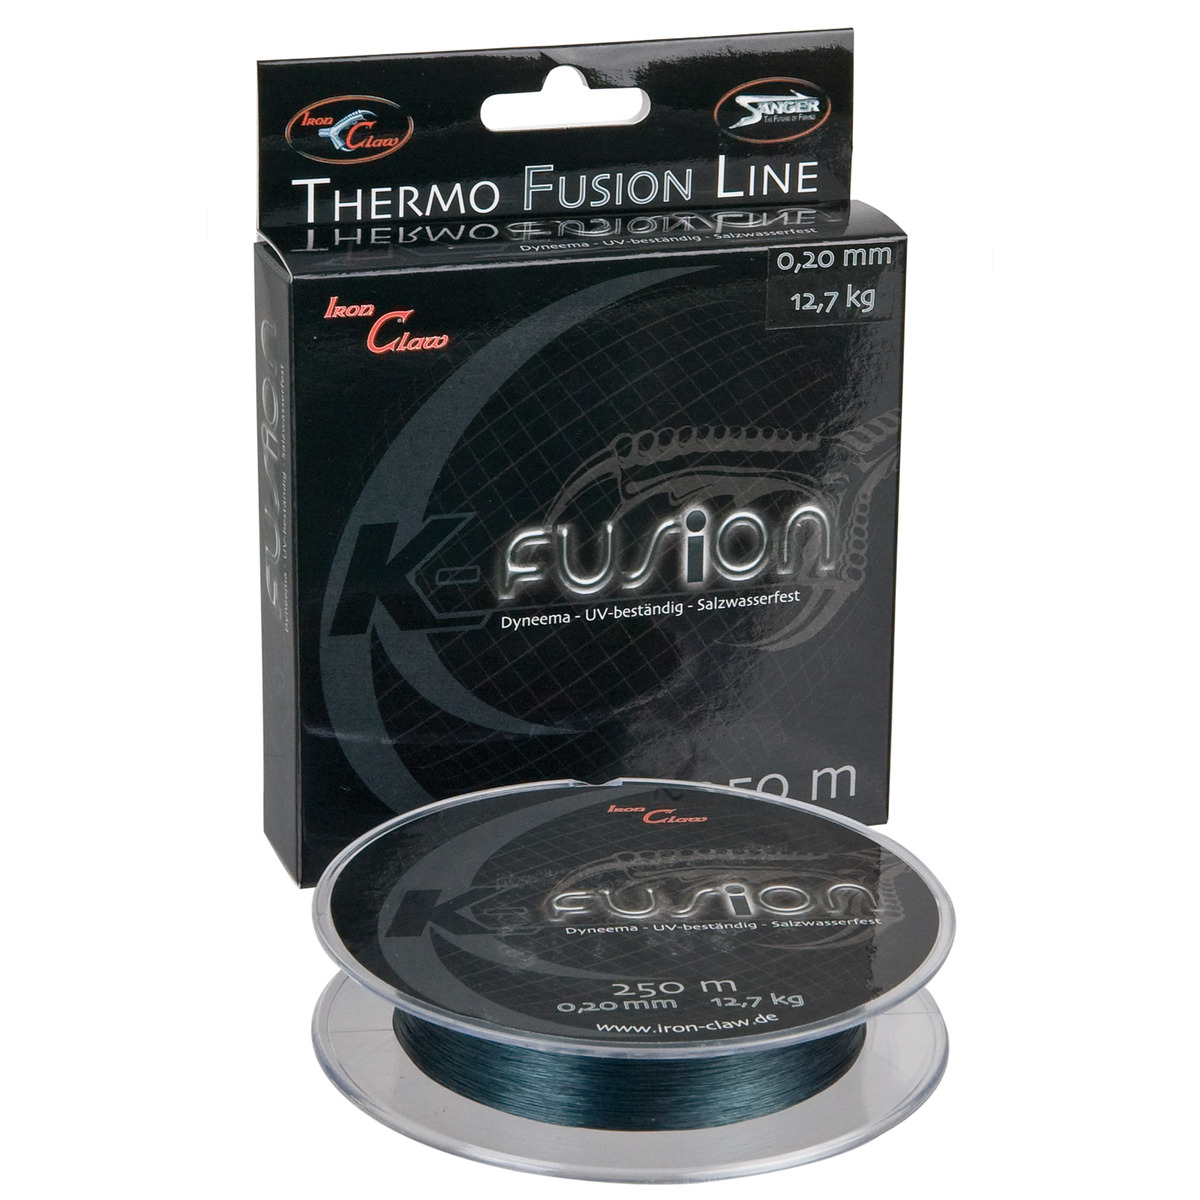 Iron Claw K-fusion G - 0.23 mm - 1000 m